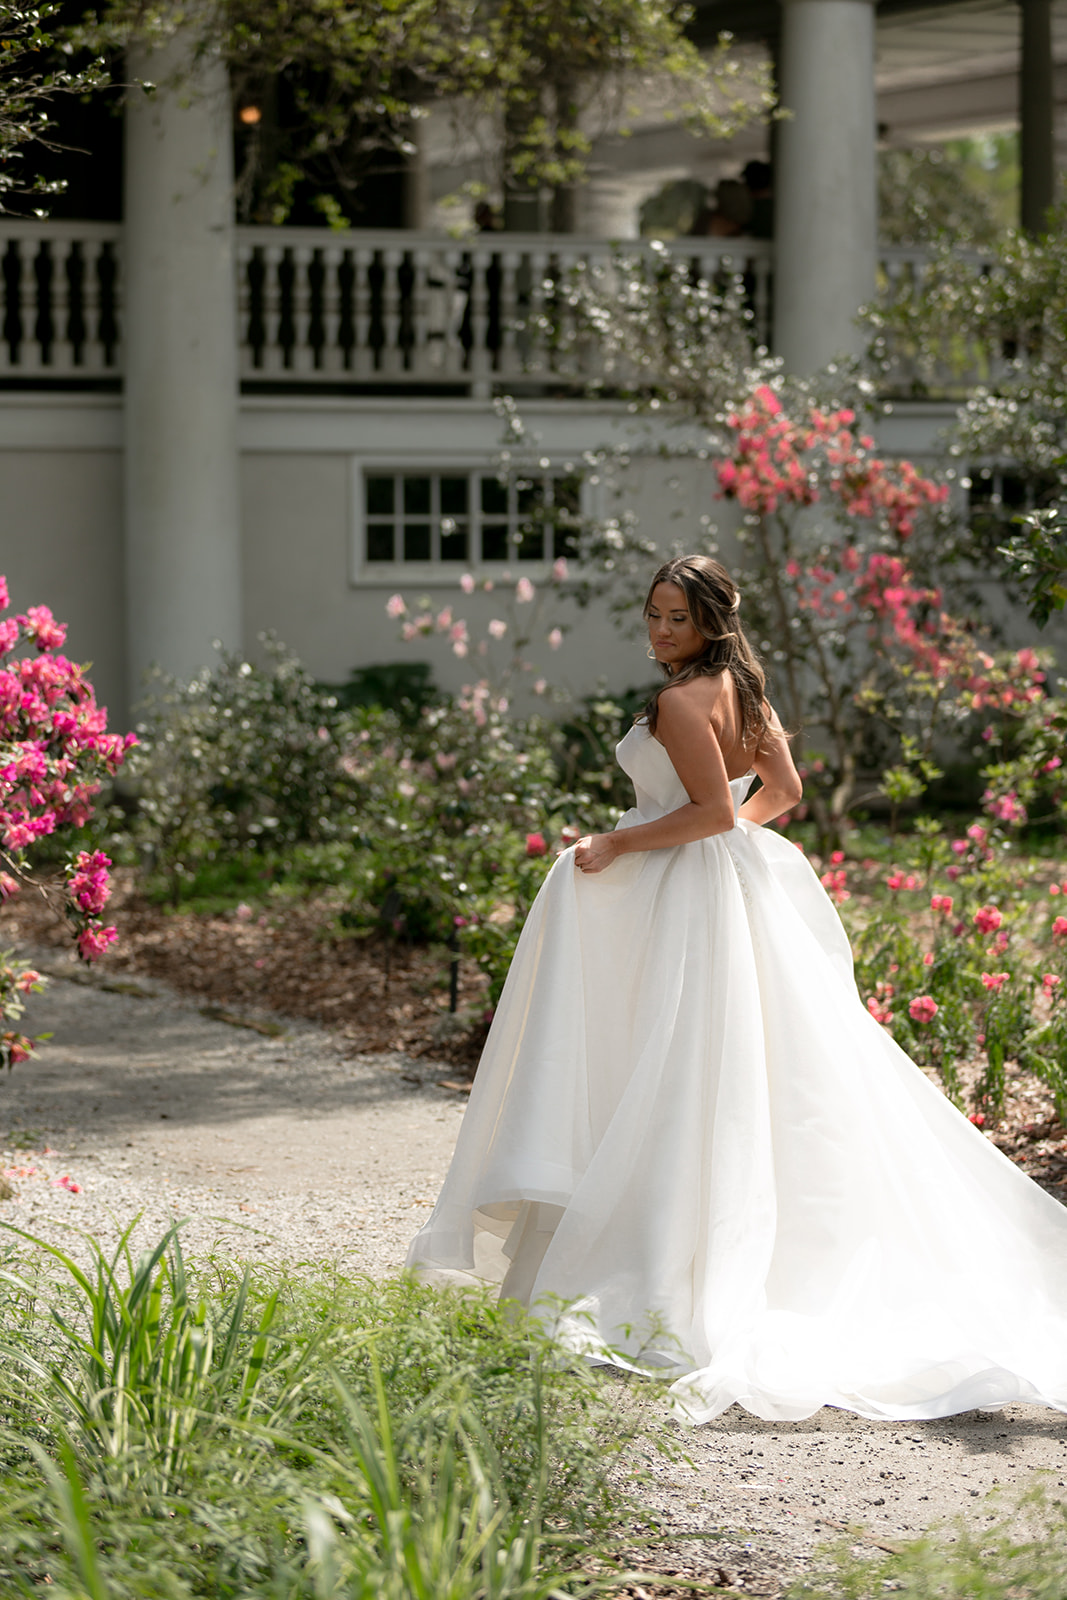 Bride walking down path at Magnolia Plantation surrounded by flowers.